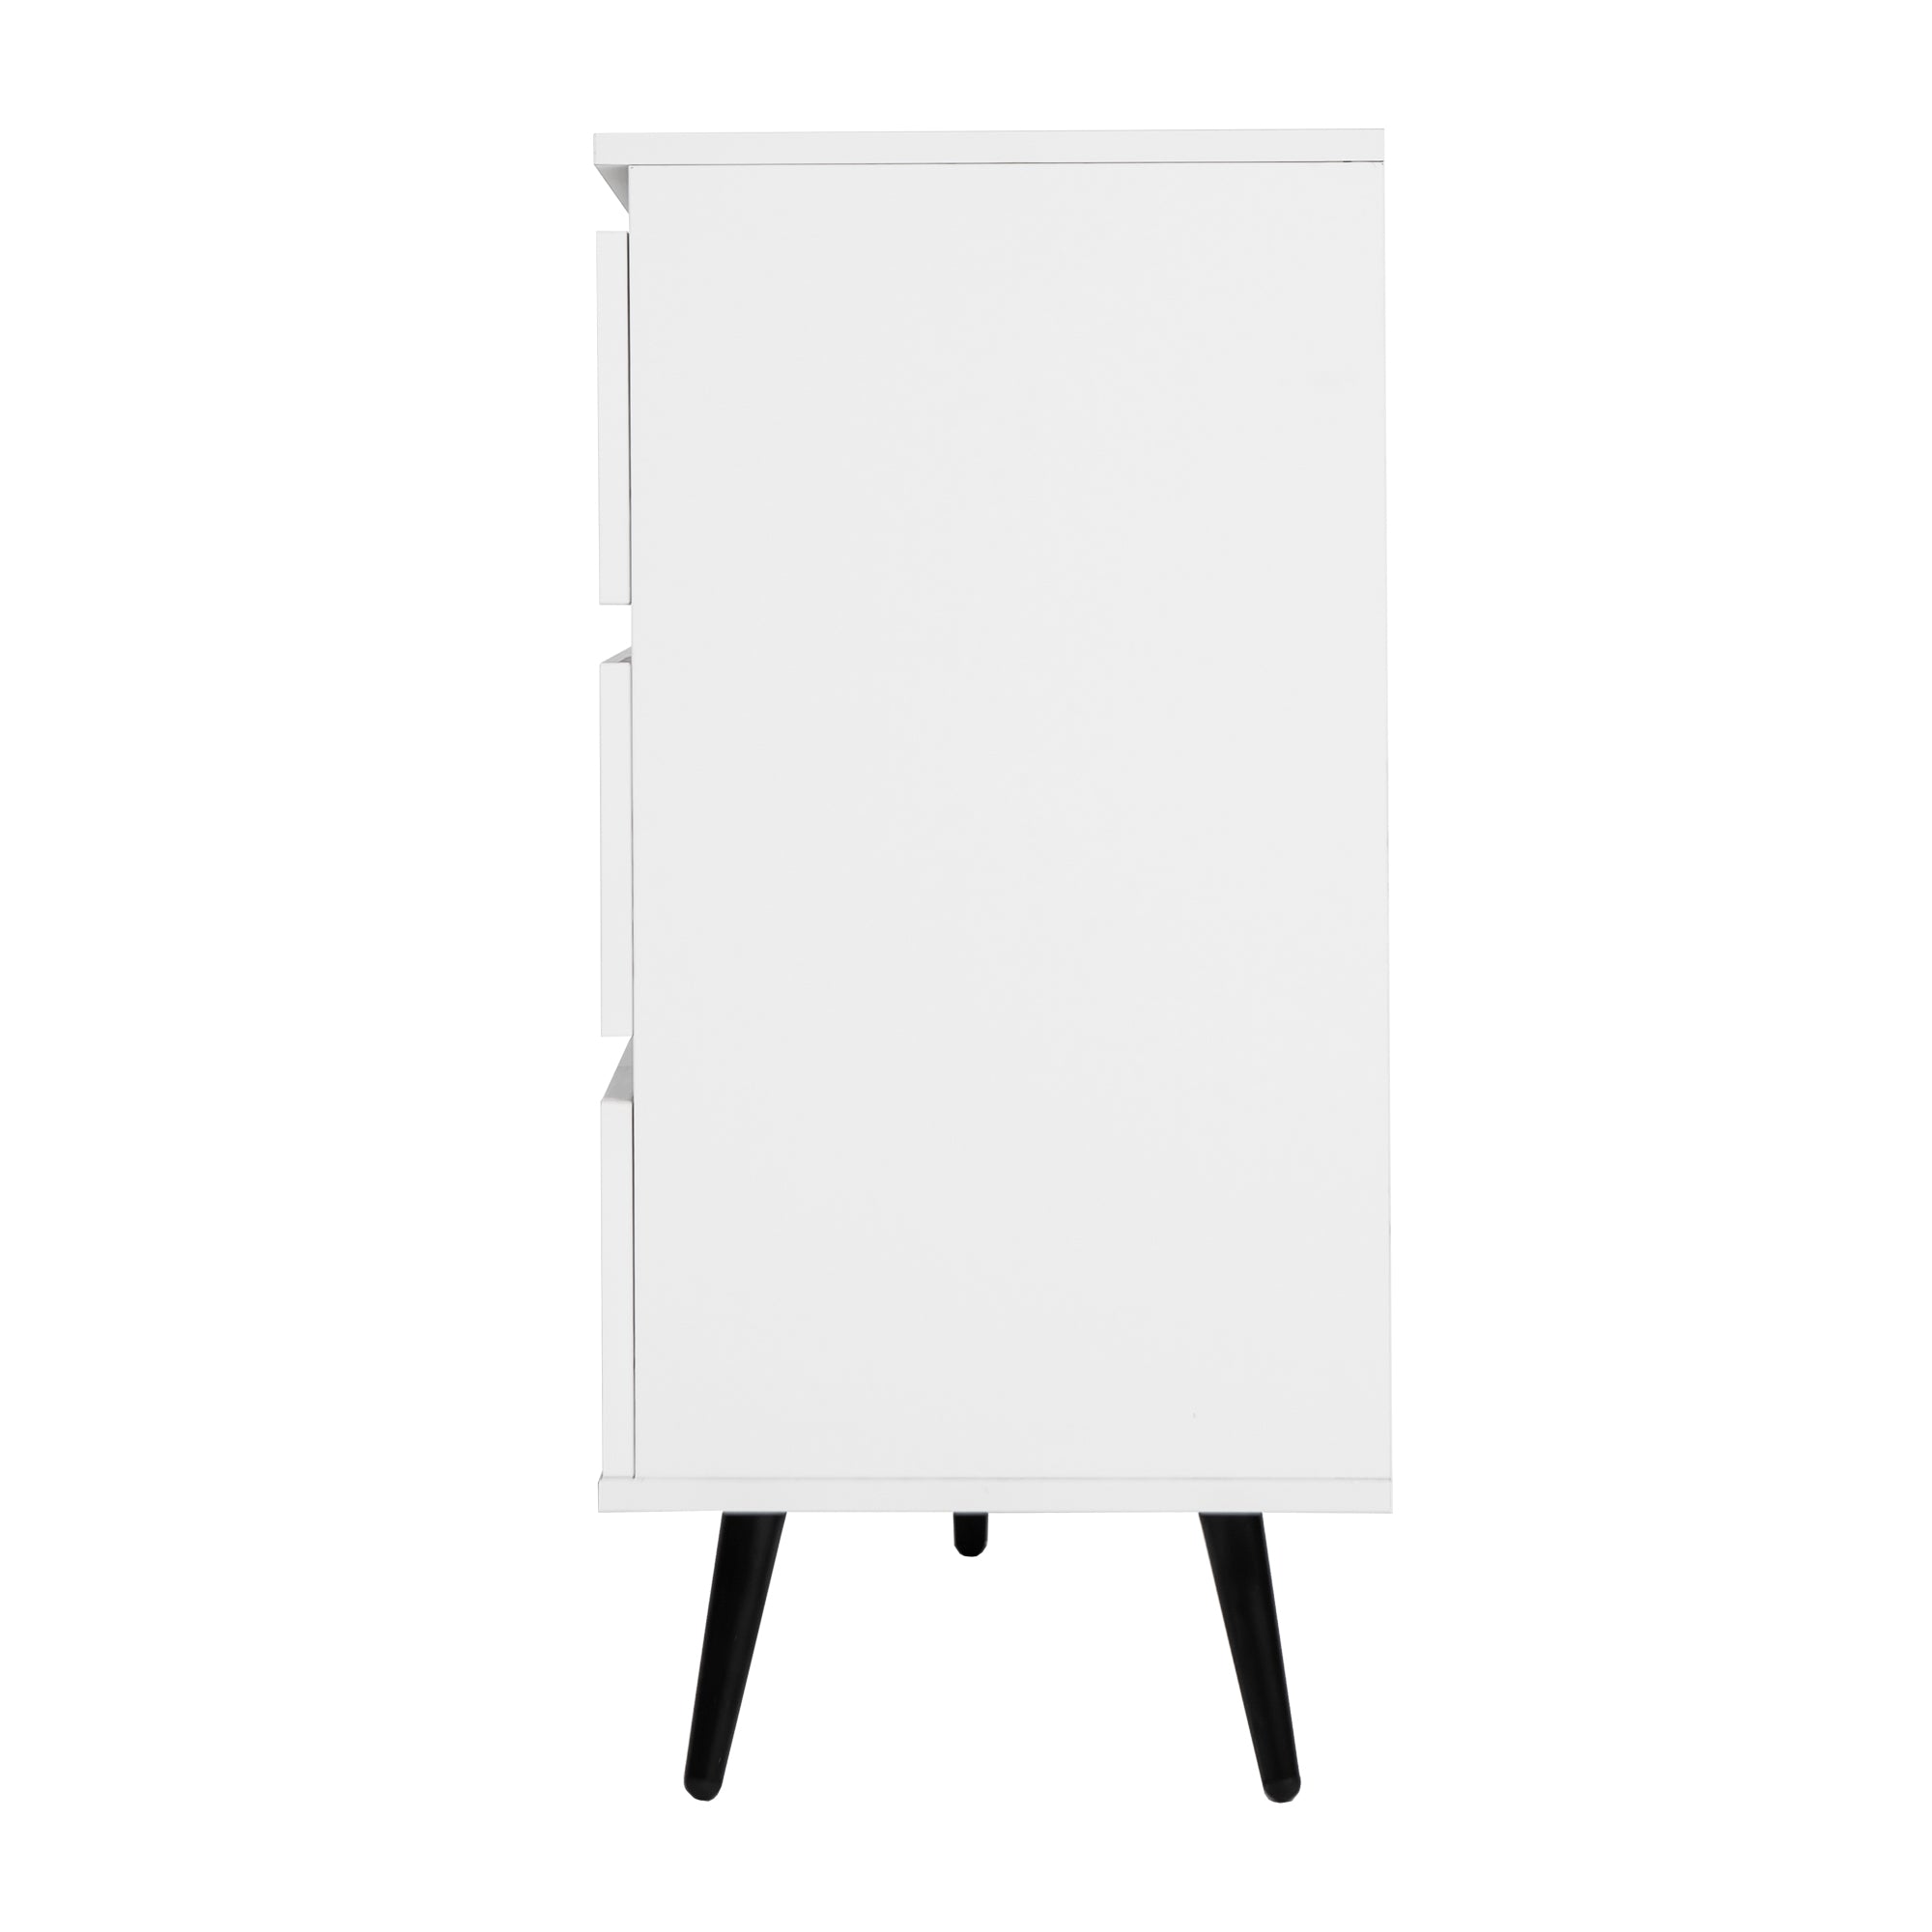 ZNTS Living Room Sideboard Storage Cabinet White High Gloss with LED Light, Modern Kitchen Unit Cupboard W132166385